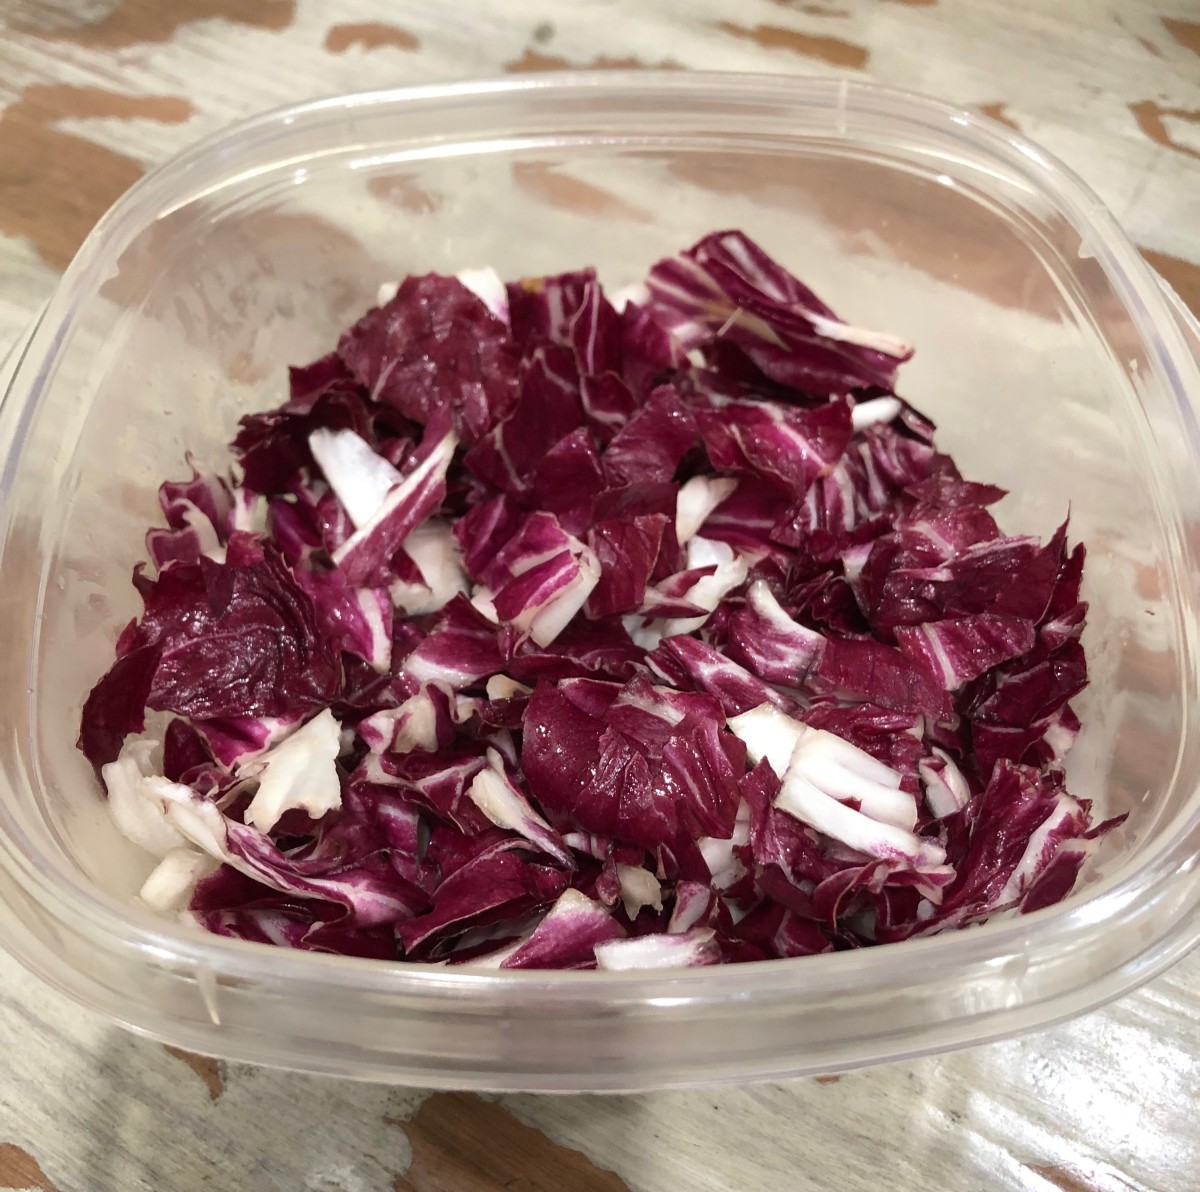 Chopped radicchio is ready to add to a scrumptious salad.